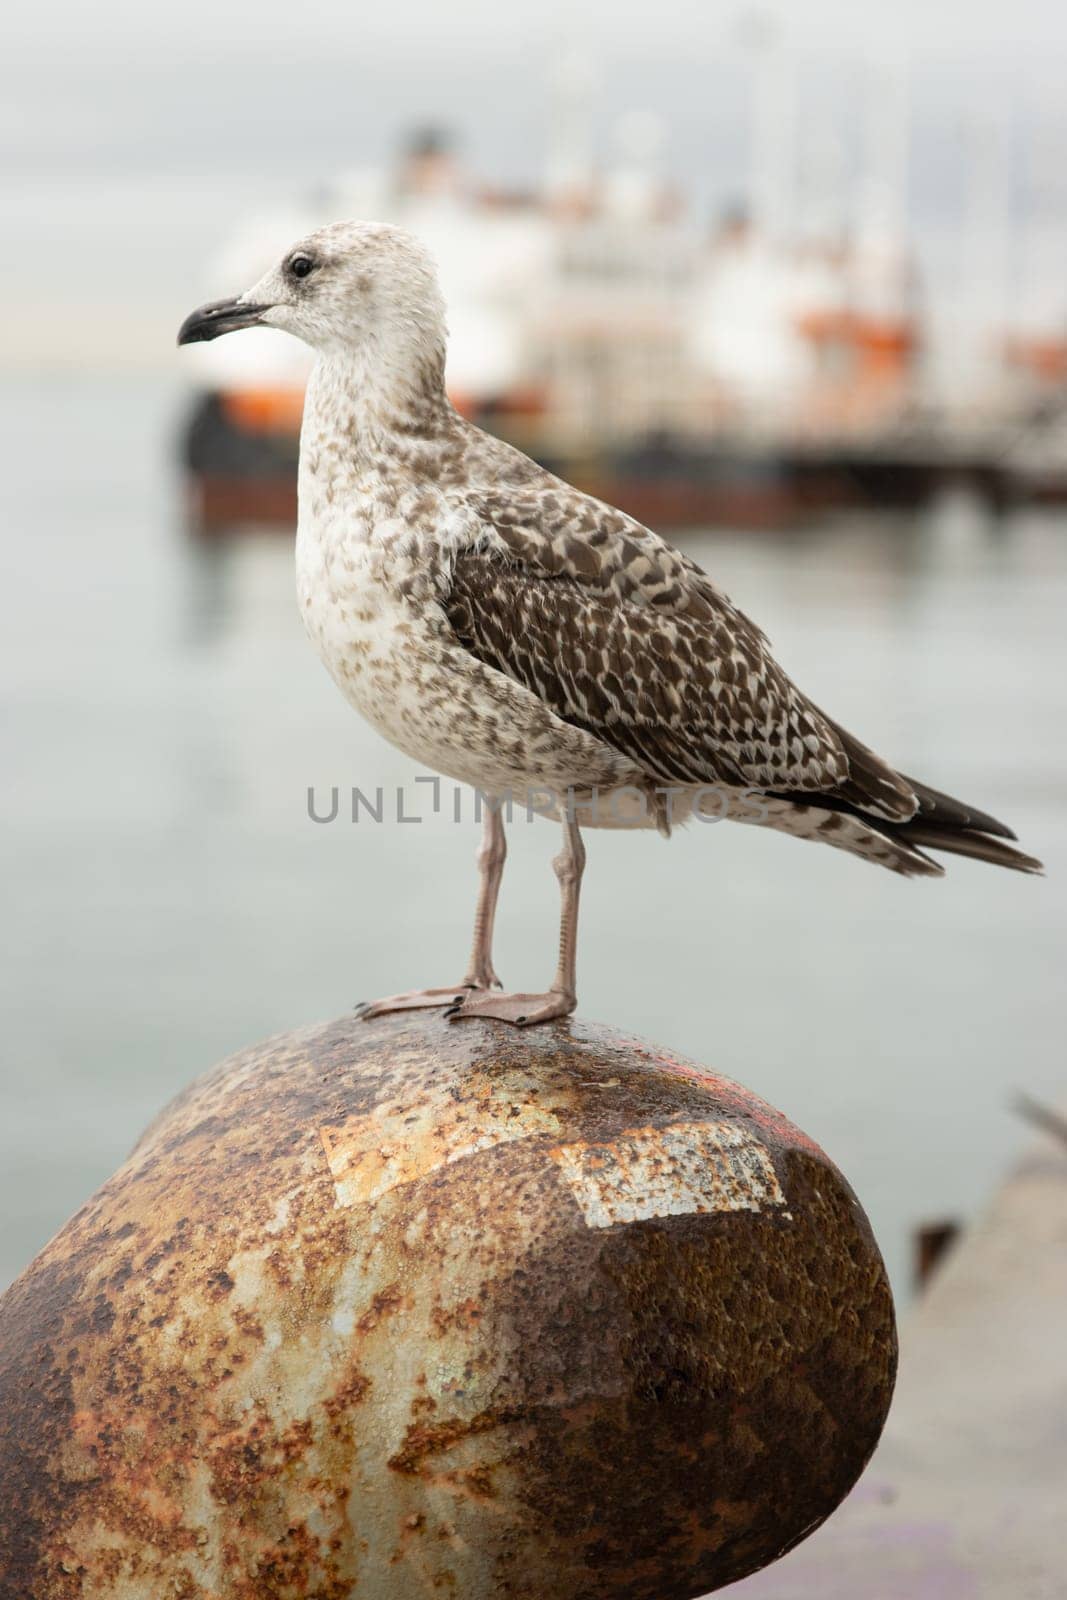 A gray gull stands on a rusty thing by the sea by Studia72